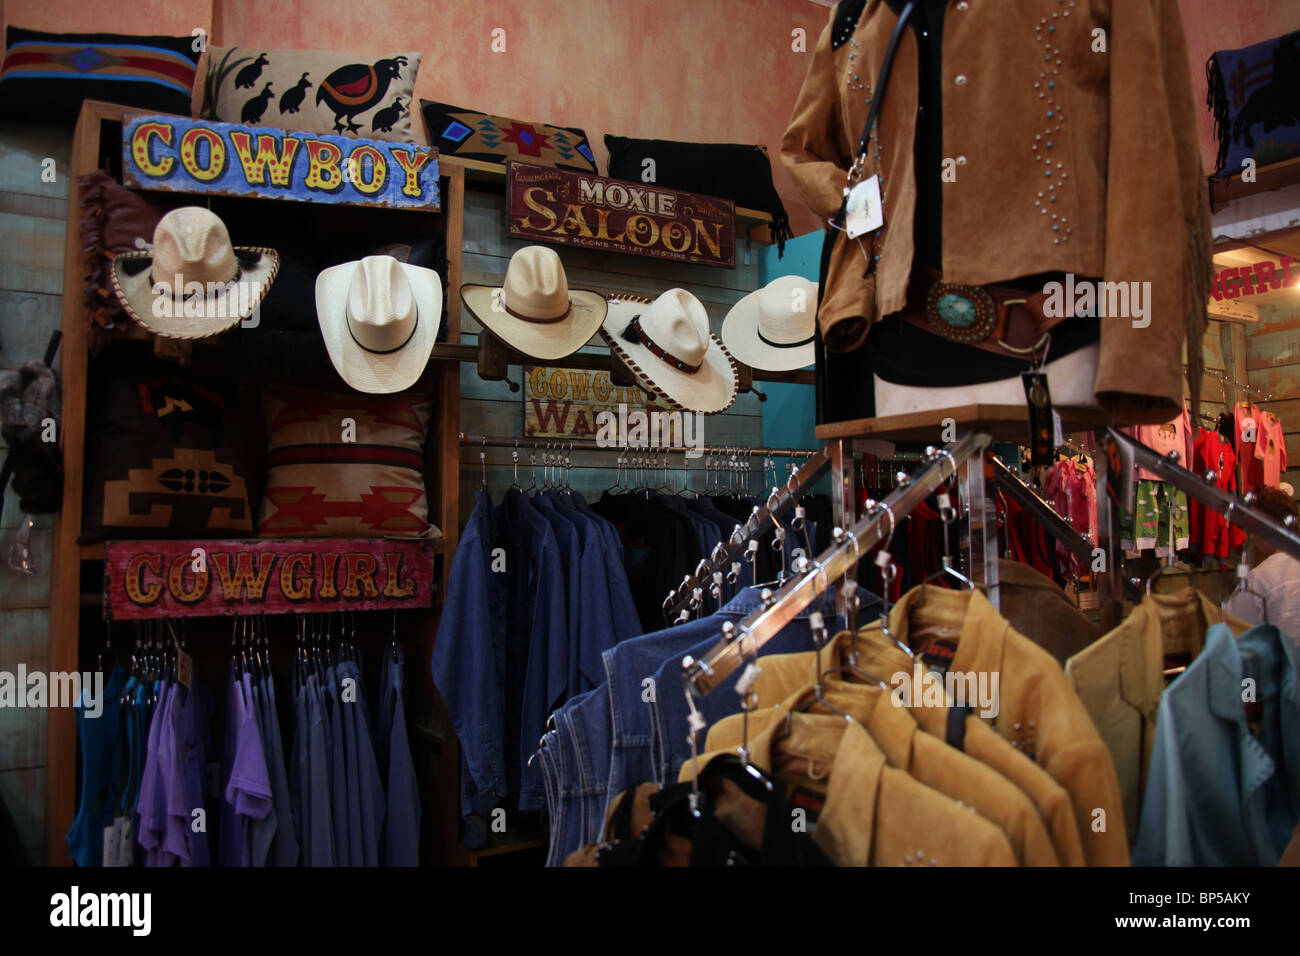 cowgirl western dresses Shop Clothing 